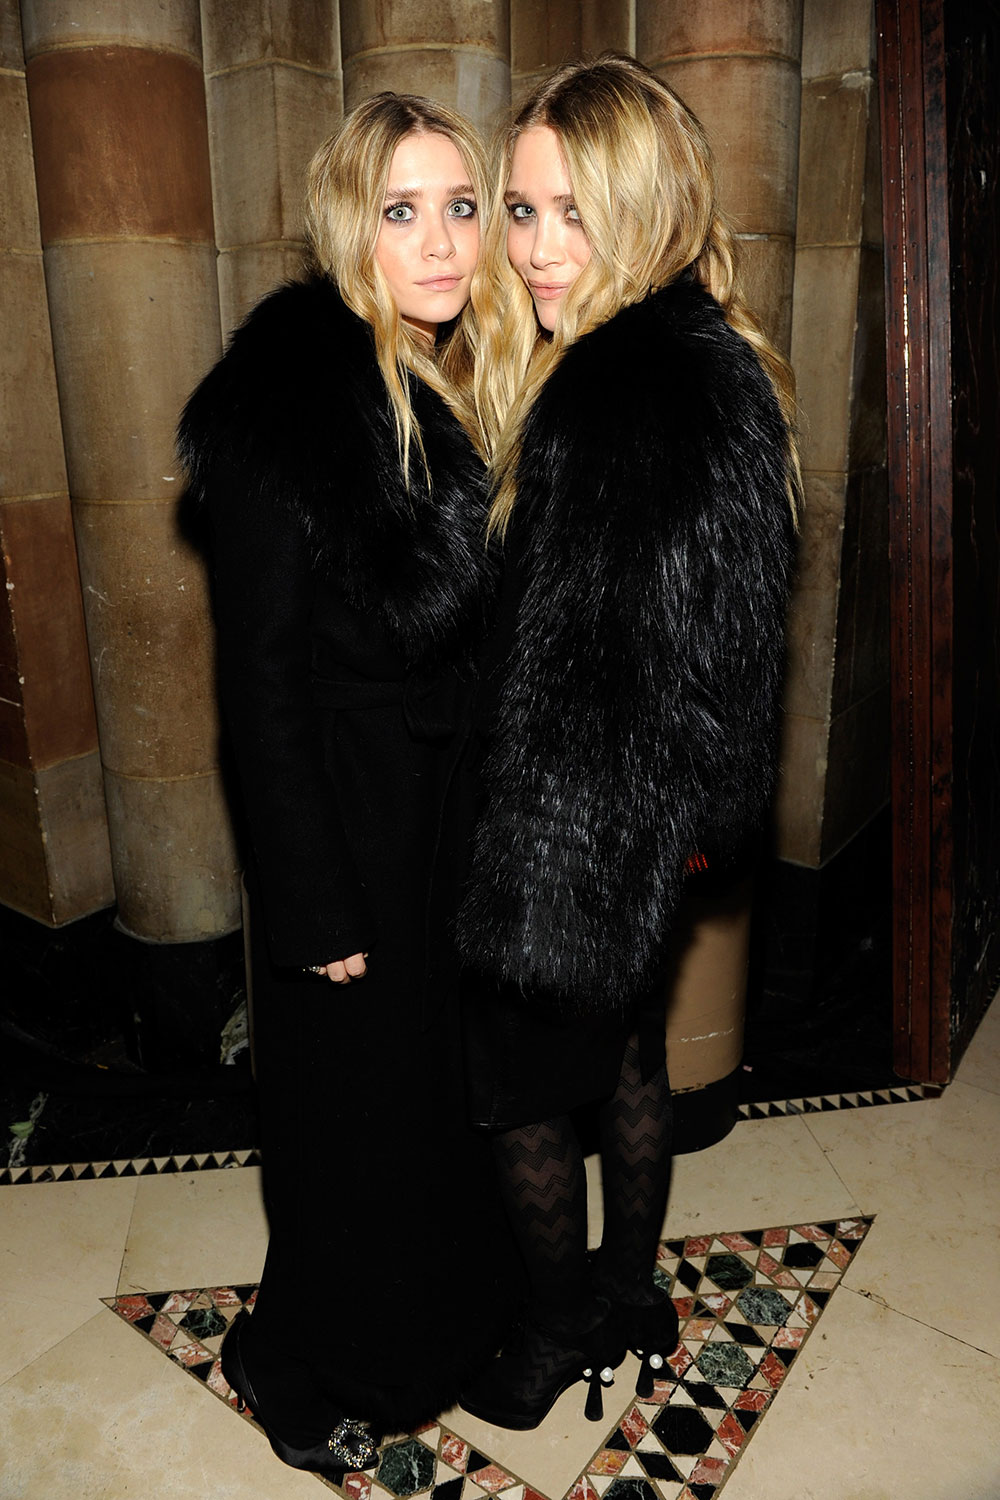 Mary-Kate and Ashley Olsen at the WWD @ 100 Anniversary Party in 2010